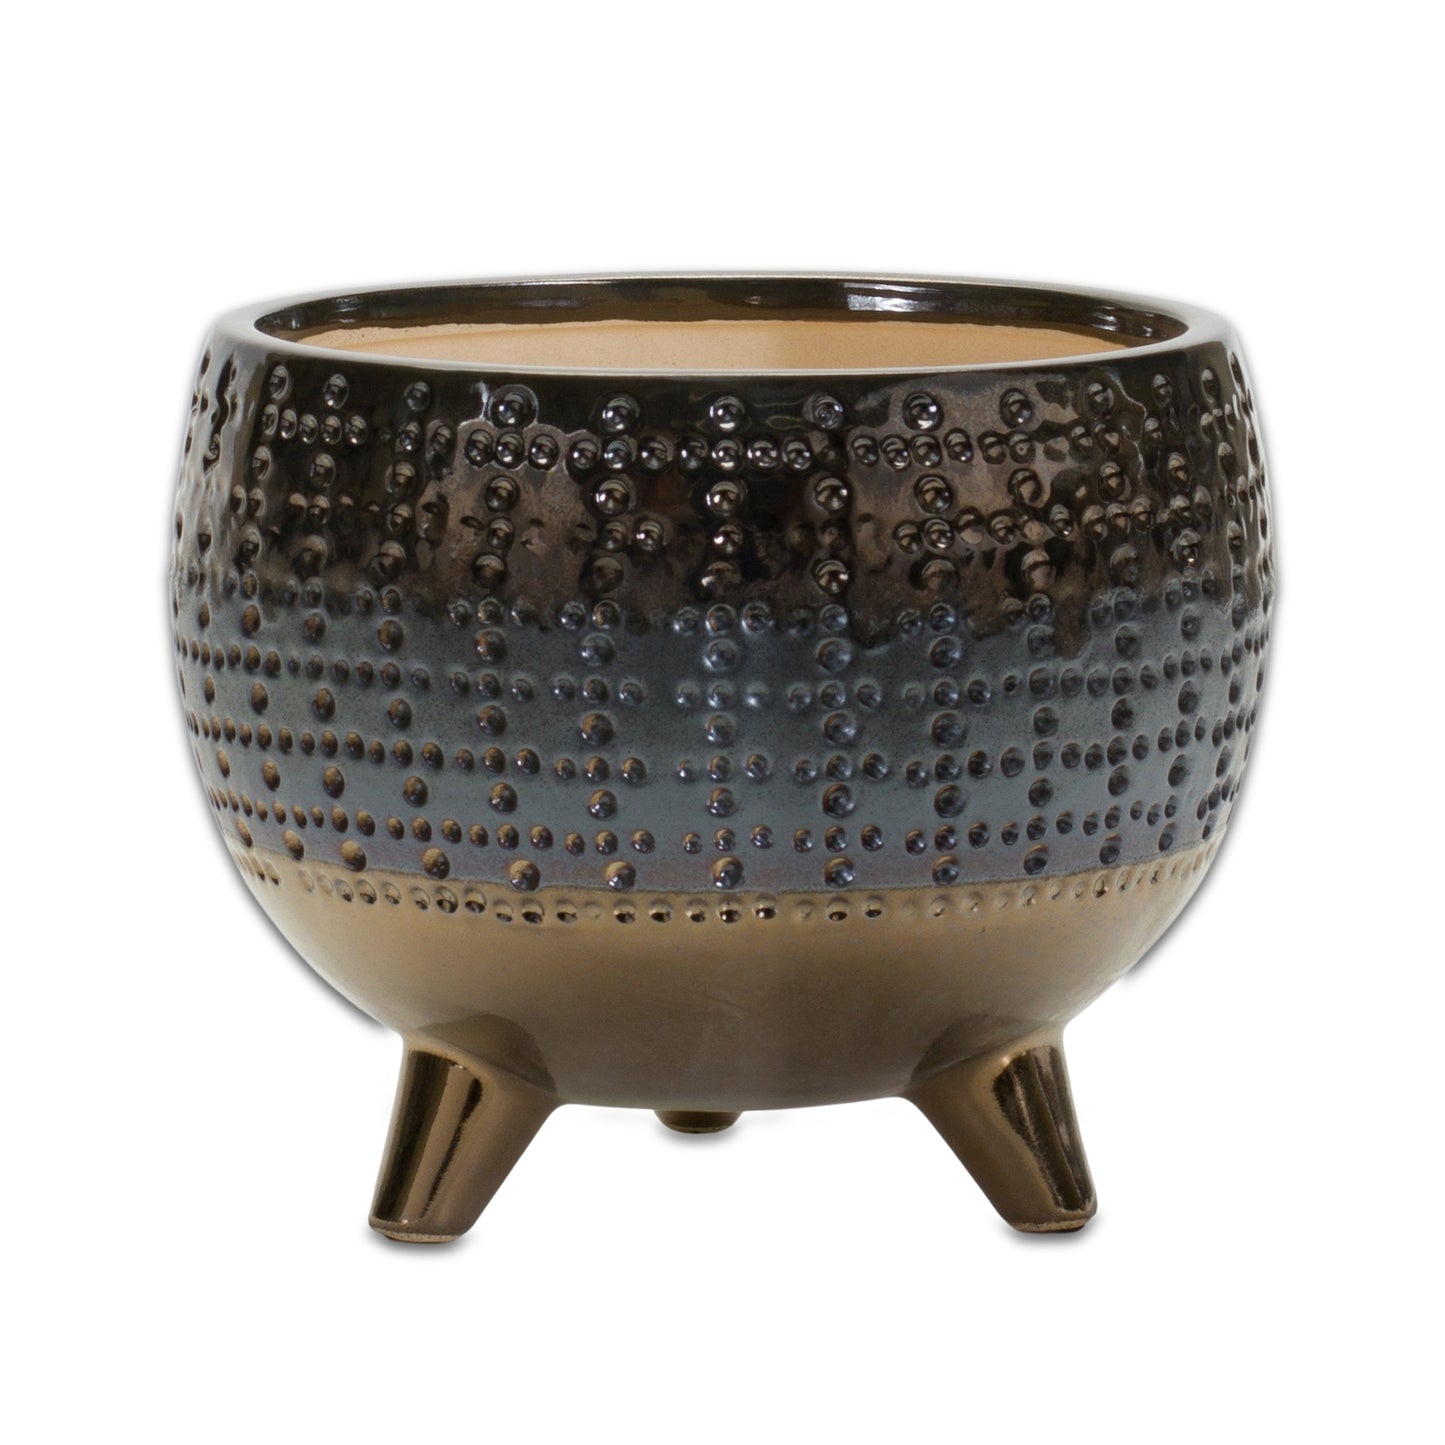 Dotted Ceramic Planter with Pewter Accent 6"H